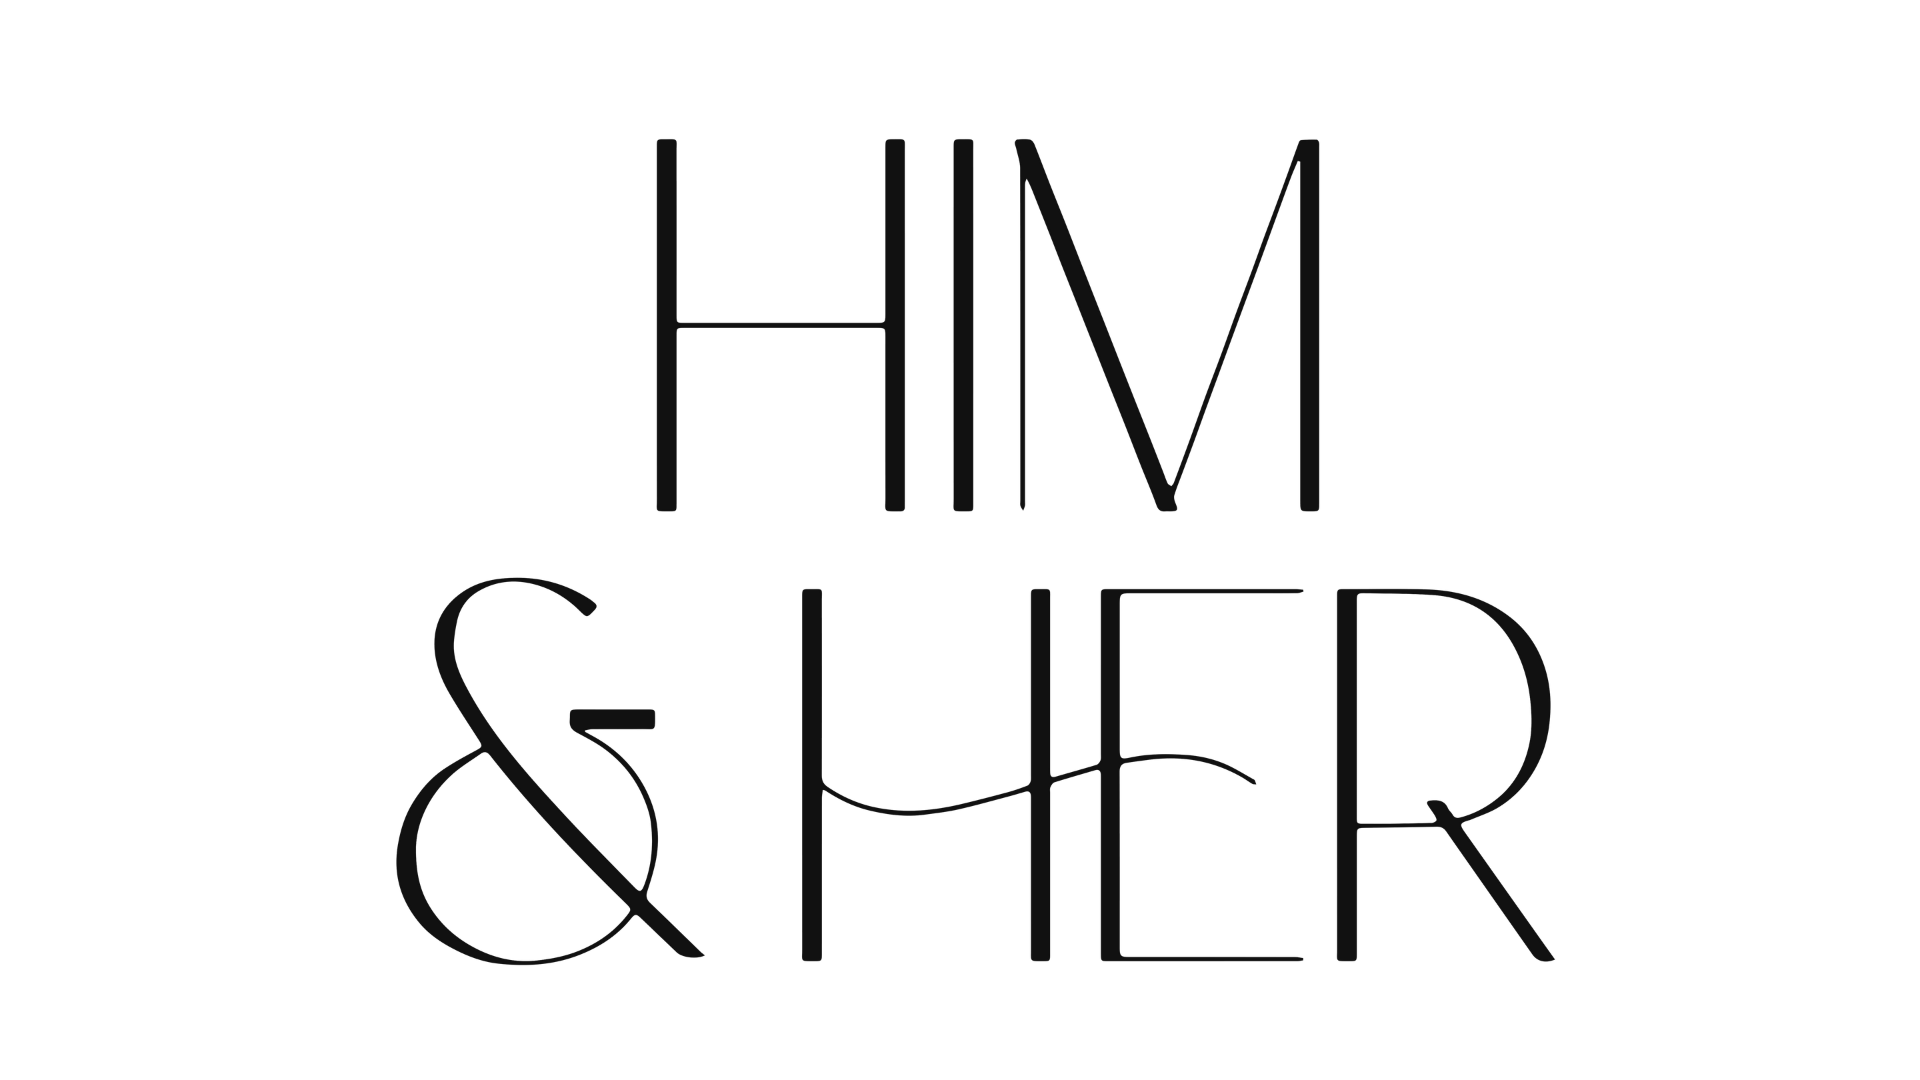 him and her